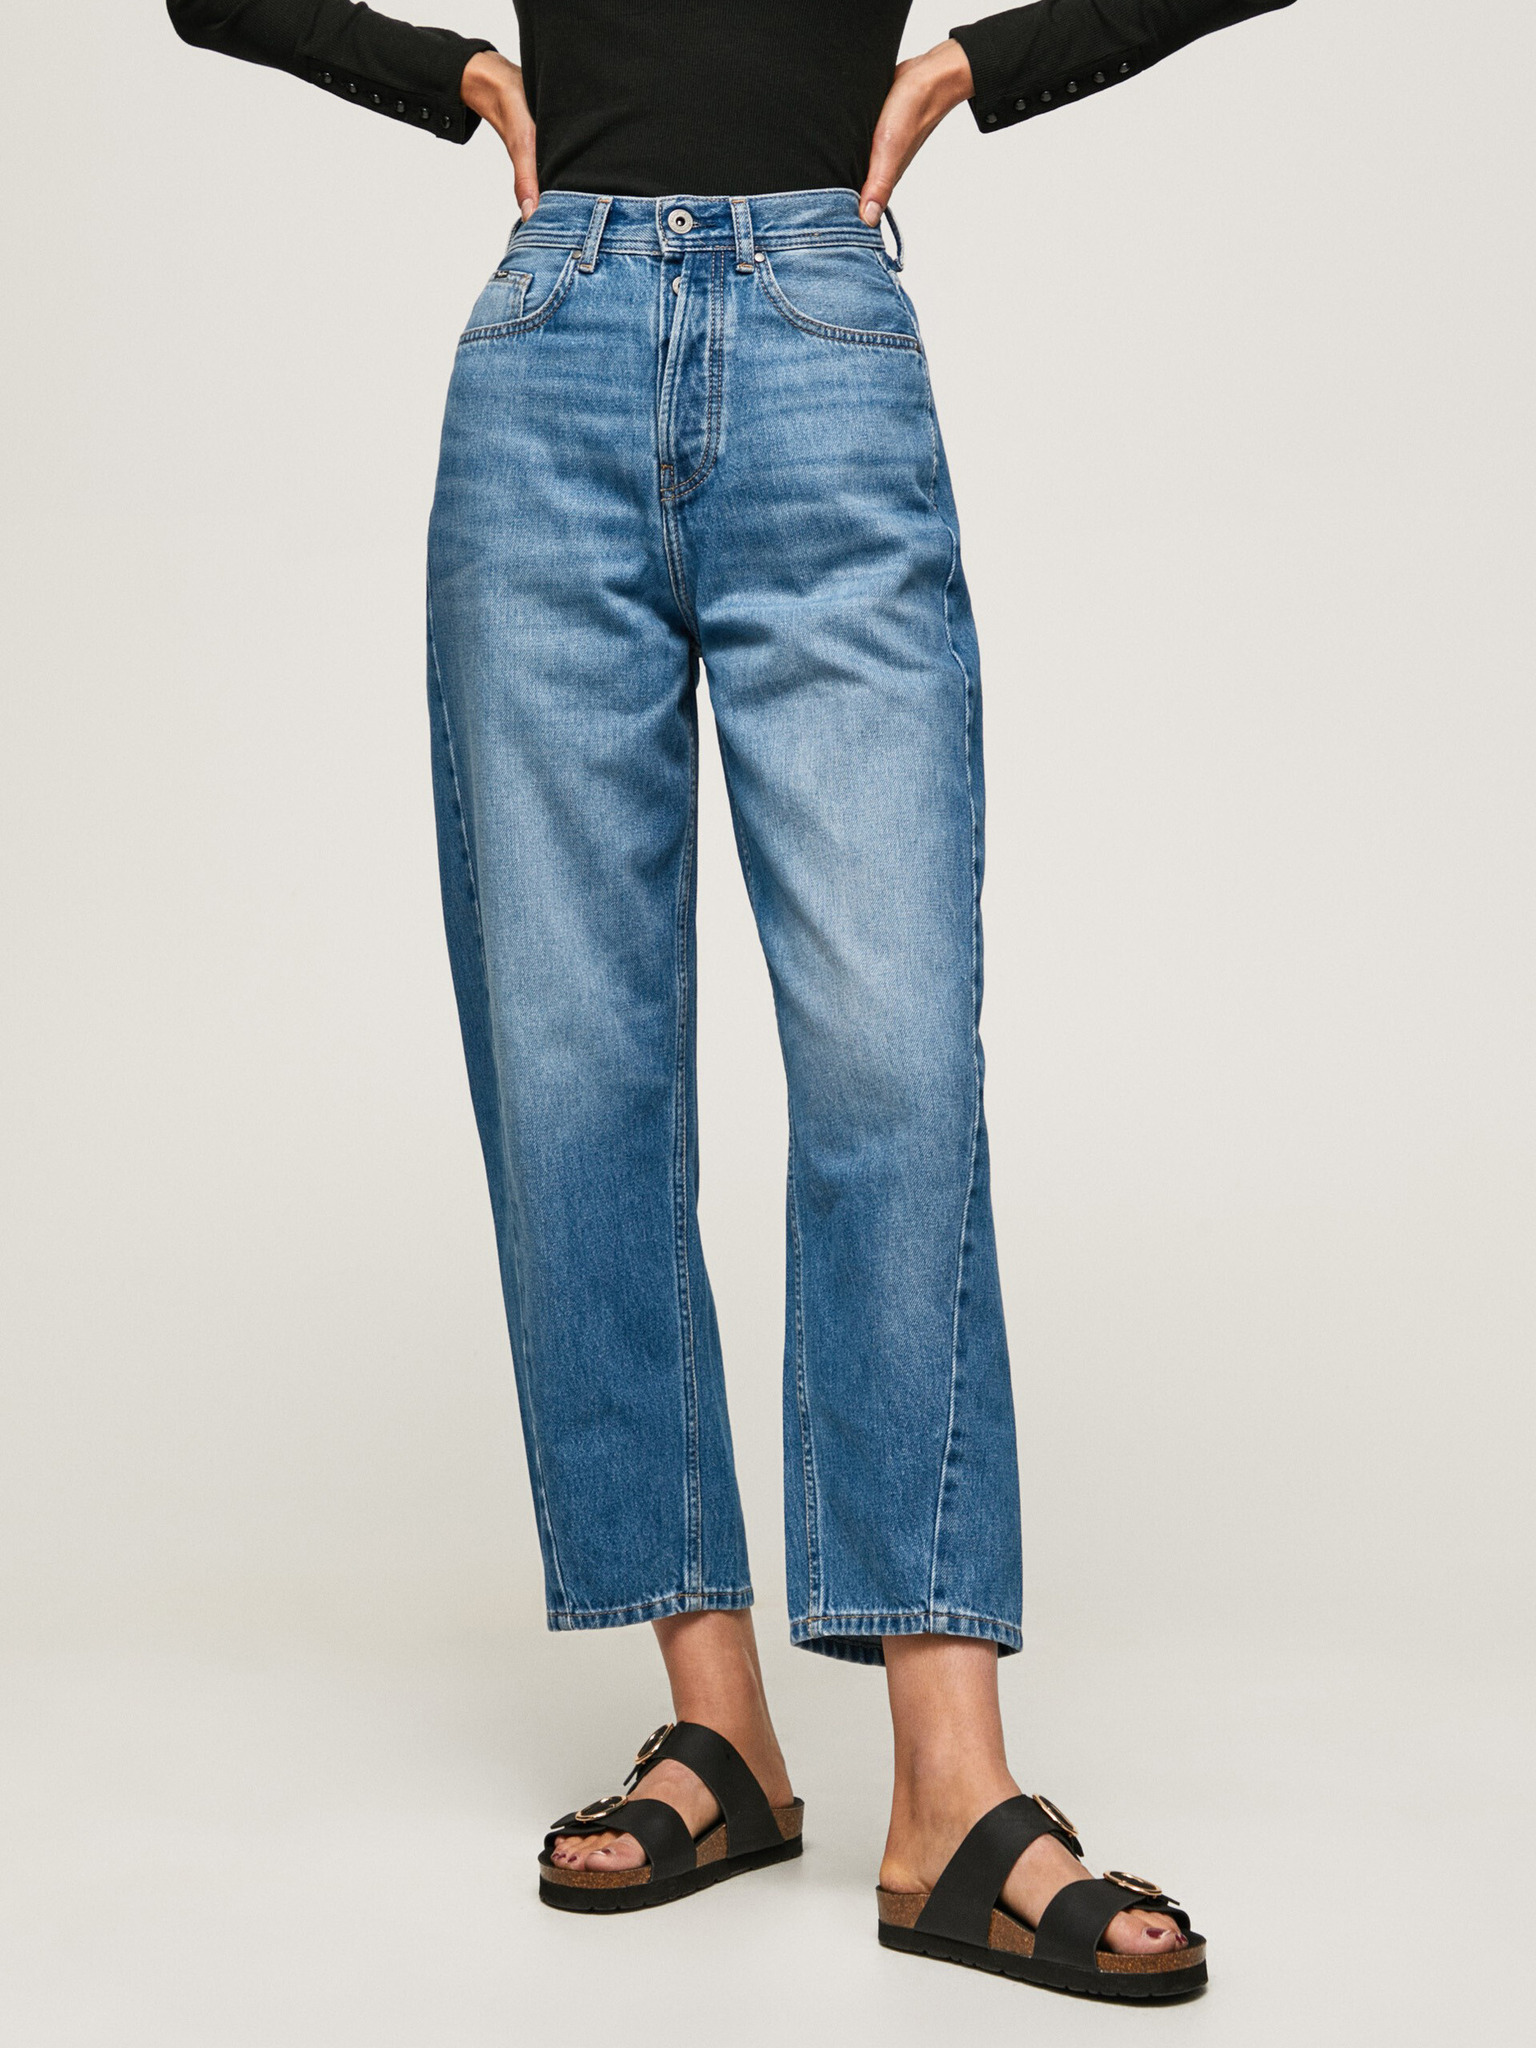 Addison Jeans Pepe Jeans